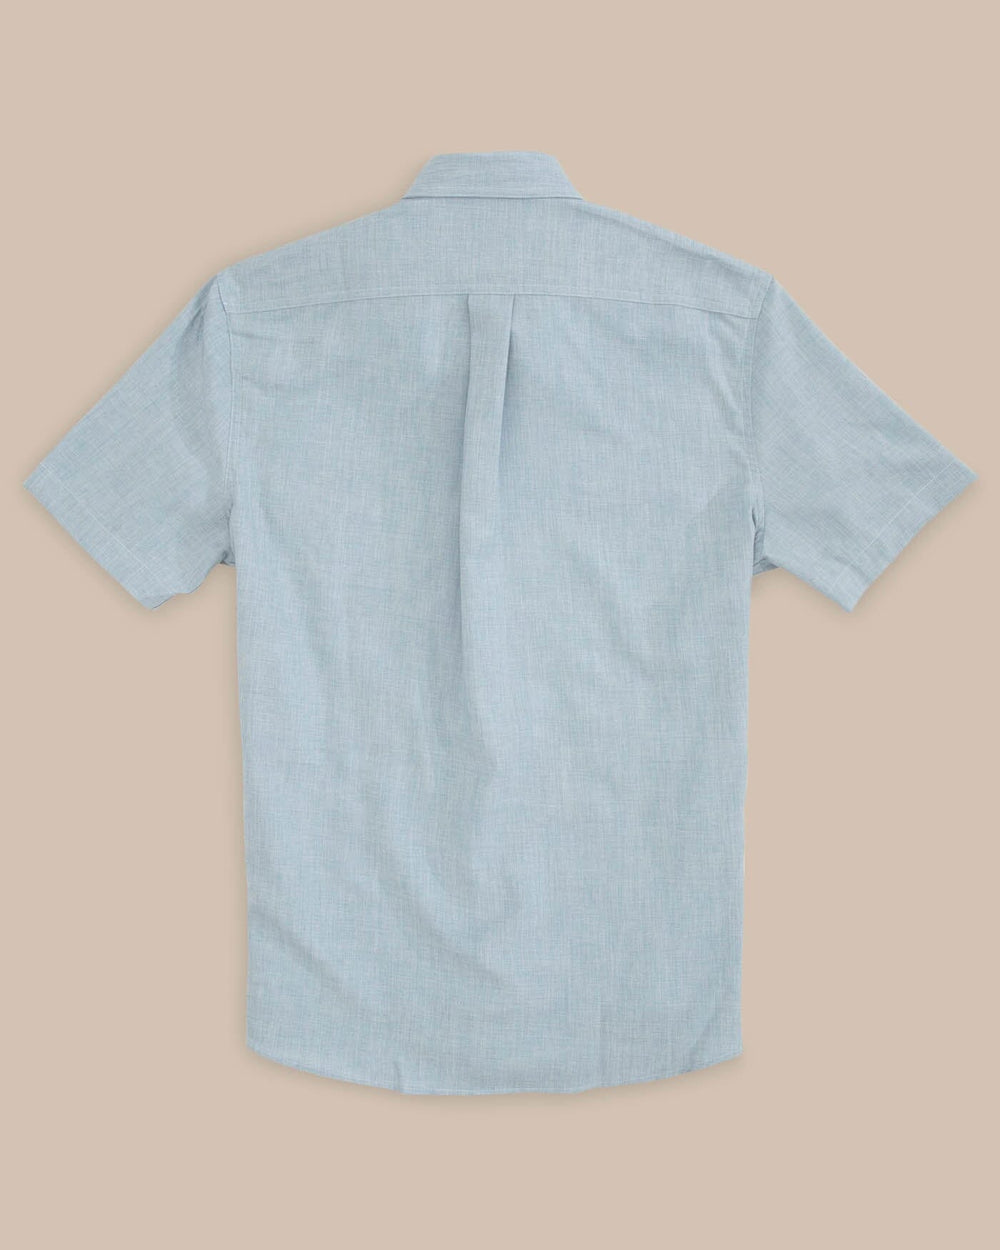 The back view of the Men's Grey Short Sleeve Dock Shirt by Southern Tide - Seagull Grey